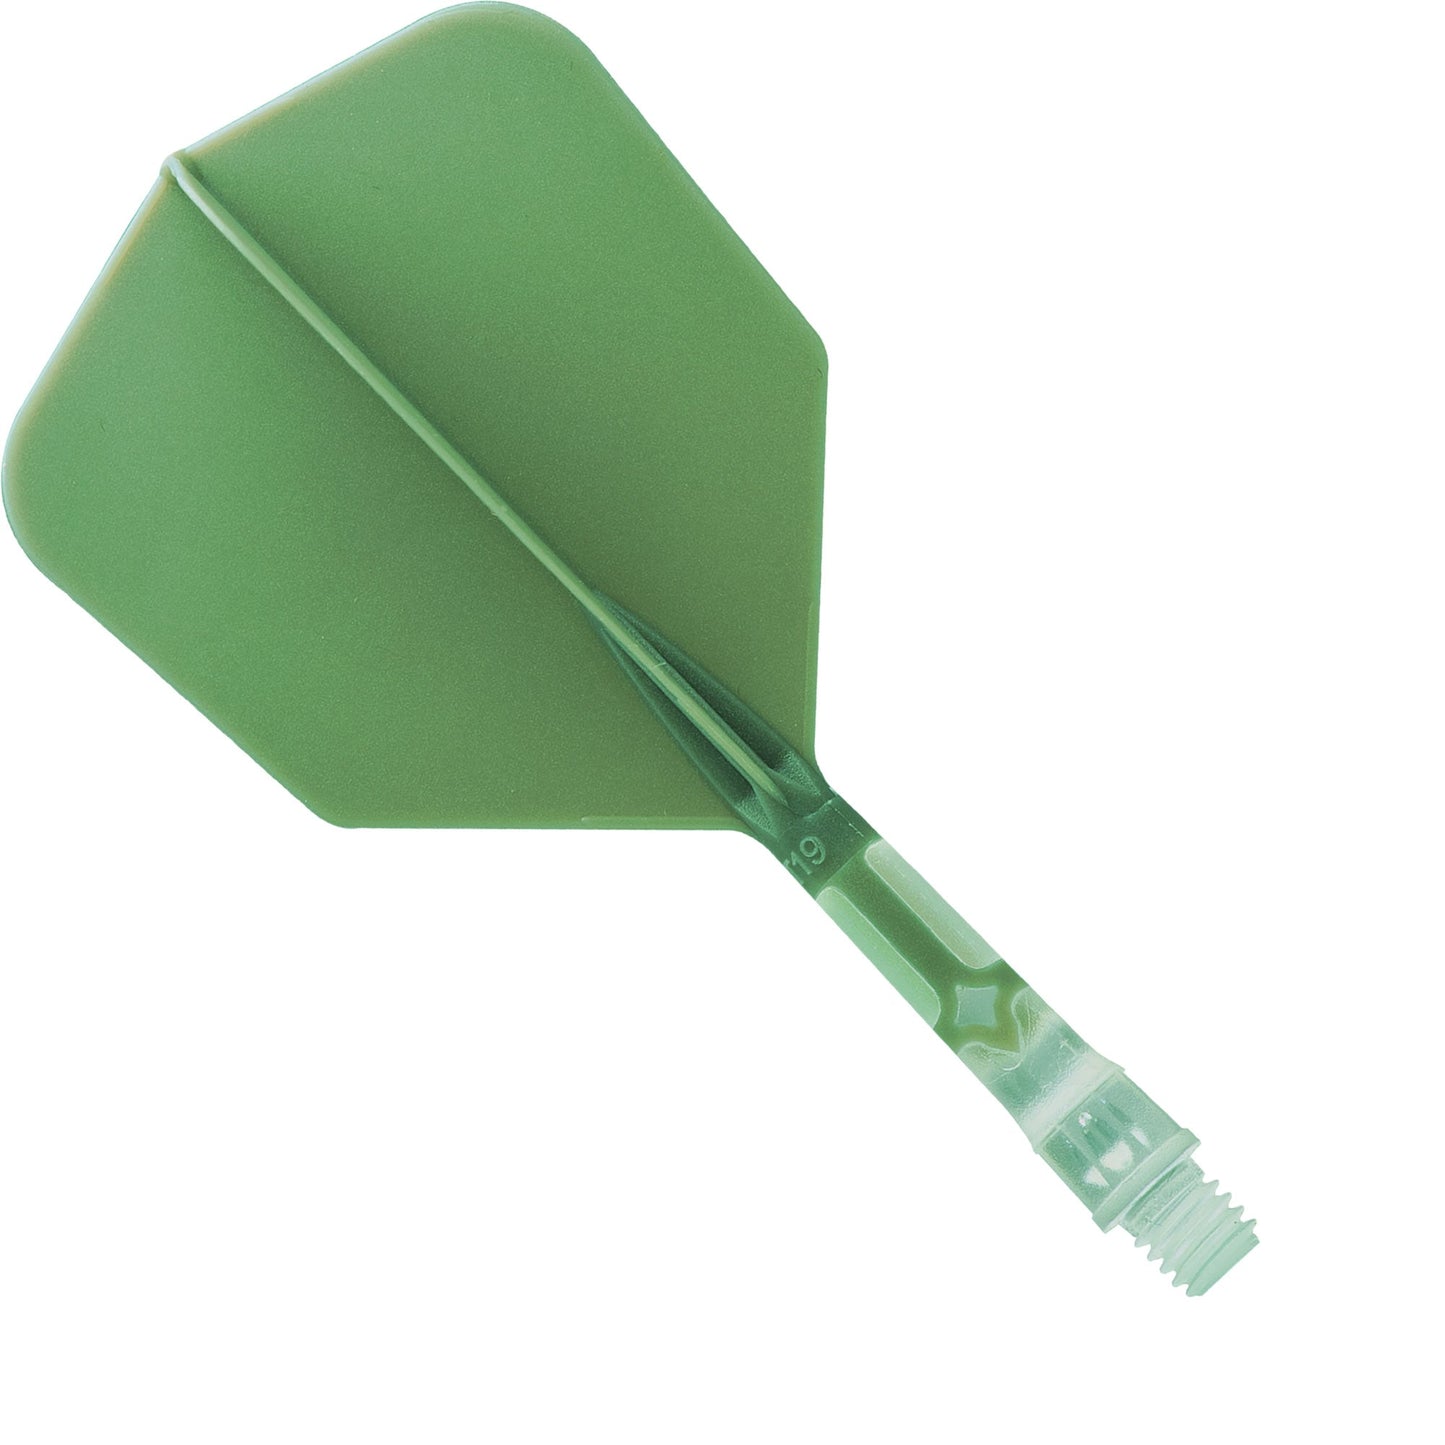 Cuesoul Rost T19 Integrated Dart Shaft and Flights - Big Wing - Clear with Green Flight Short